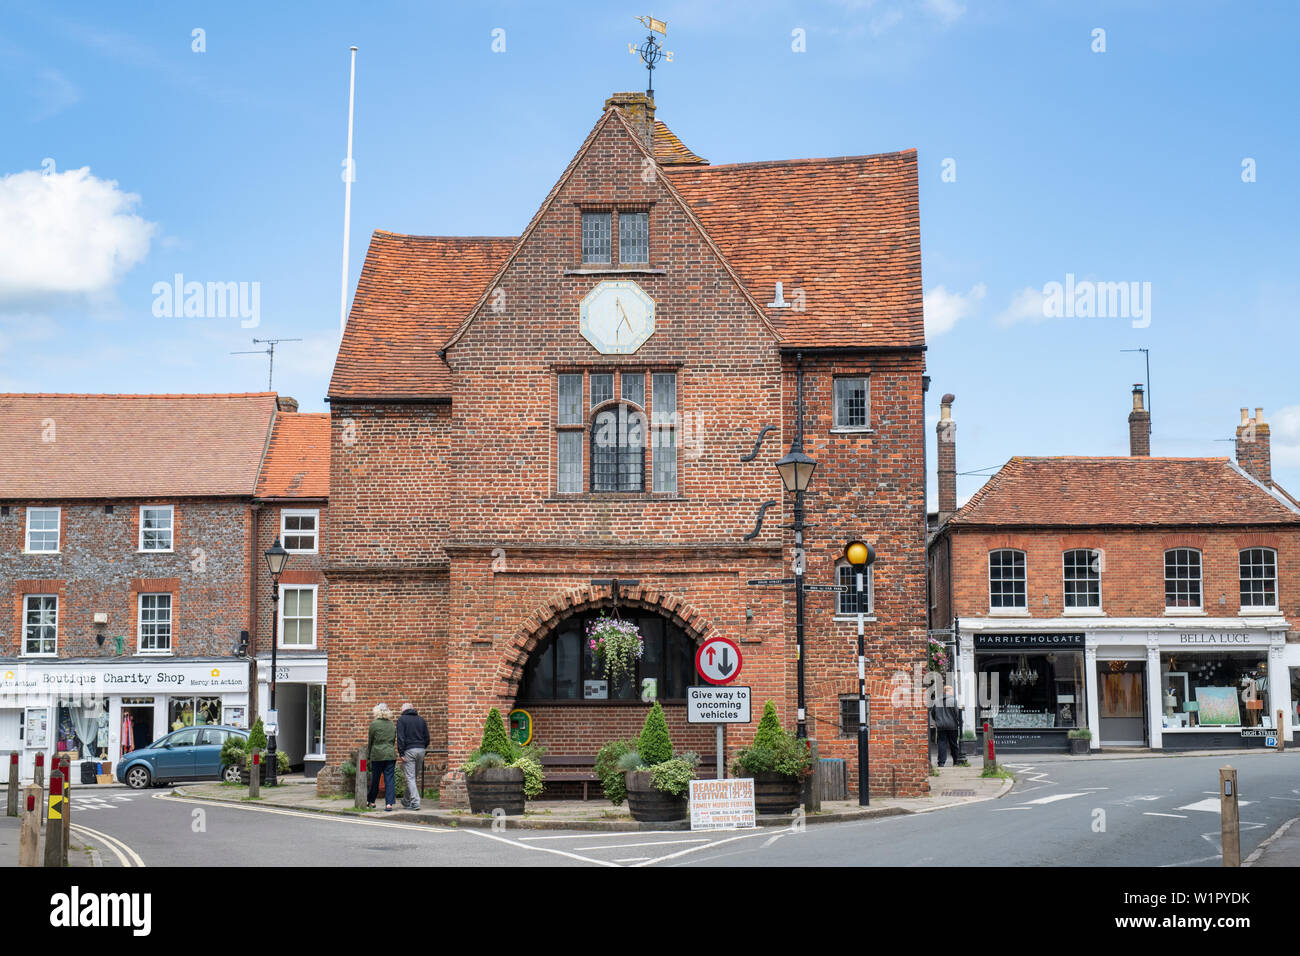 Market Hall in the town of Watlington, Oxfordshire, England Stock Photo